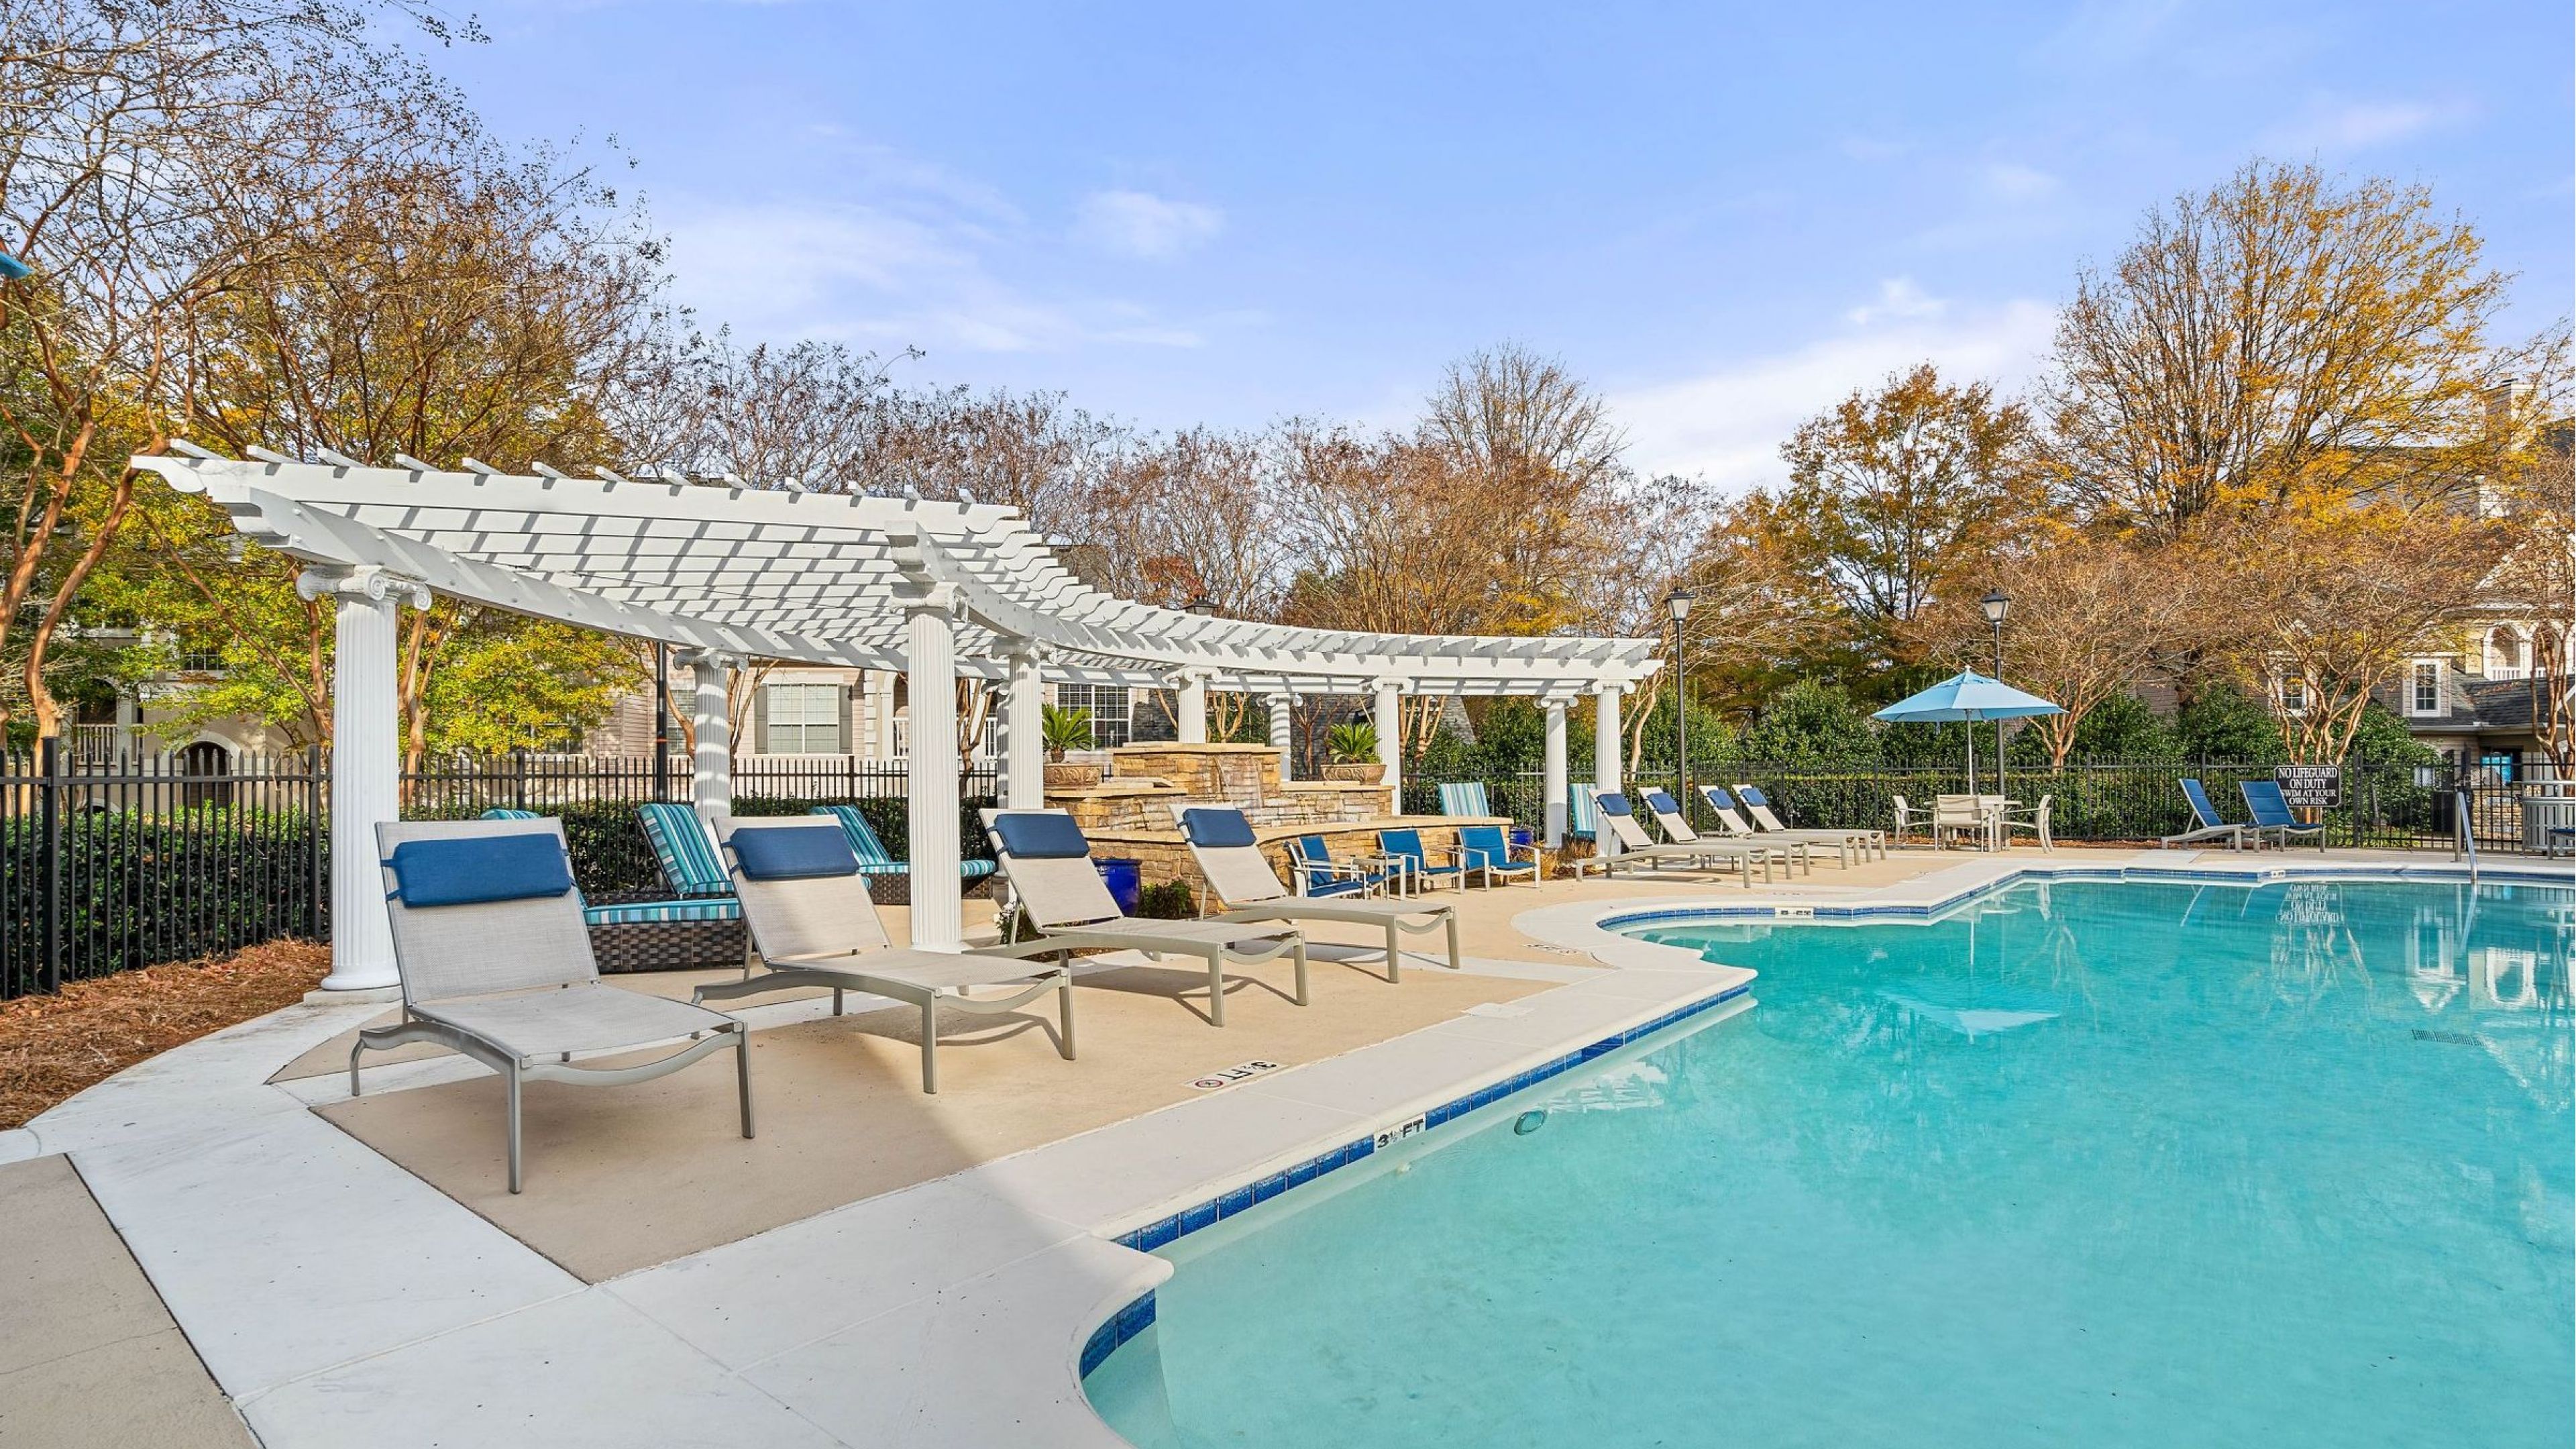 Hawthorne at the Carlyle resident pool with lounge chairs under a beautiful semi-shaded awning.